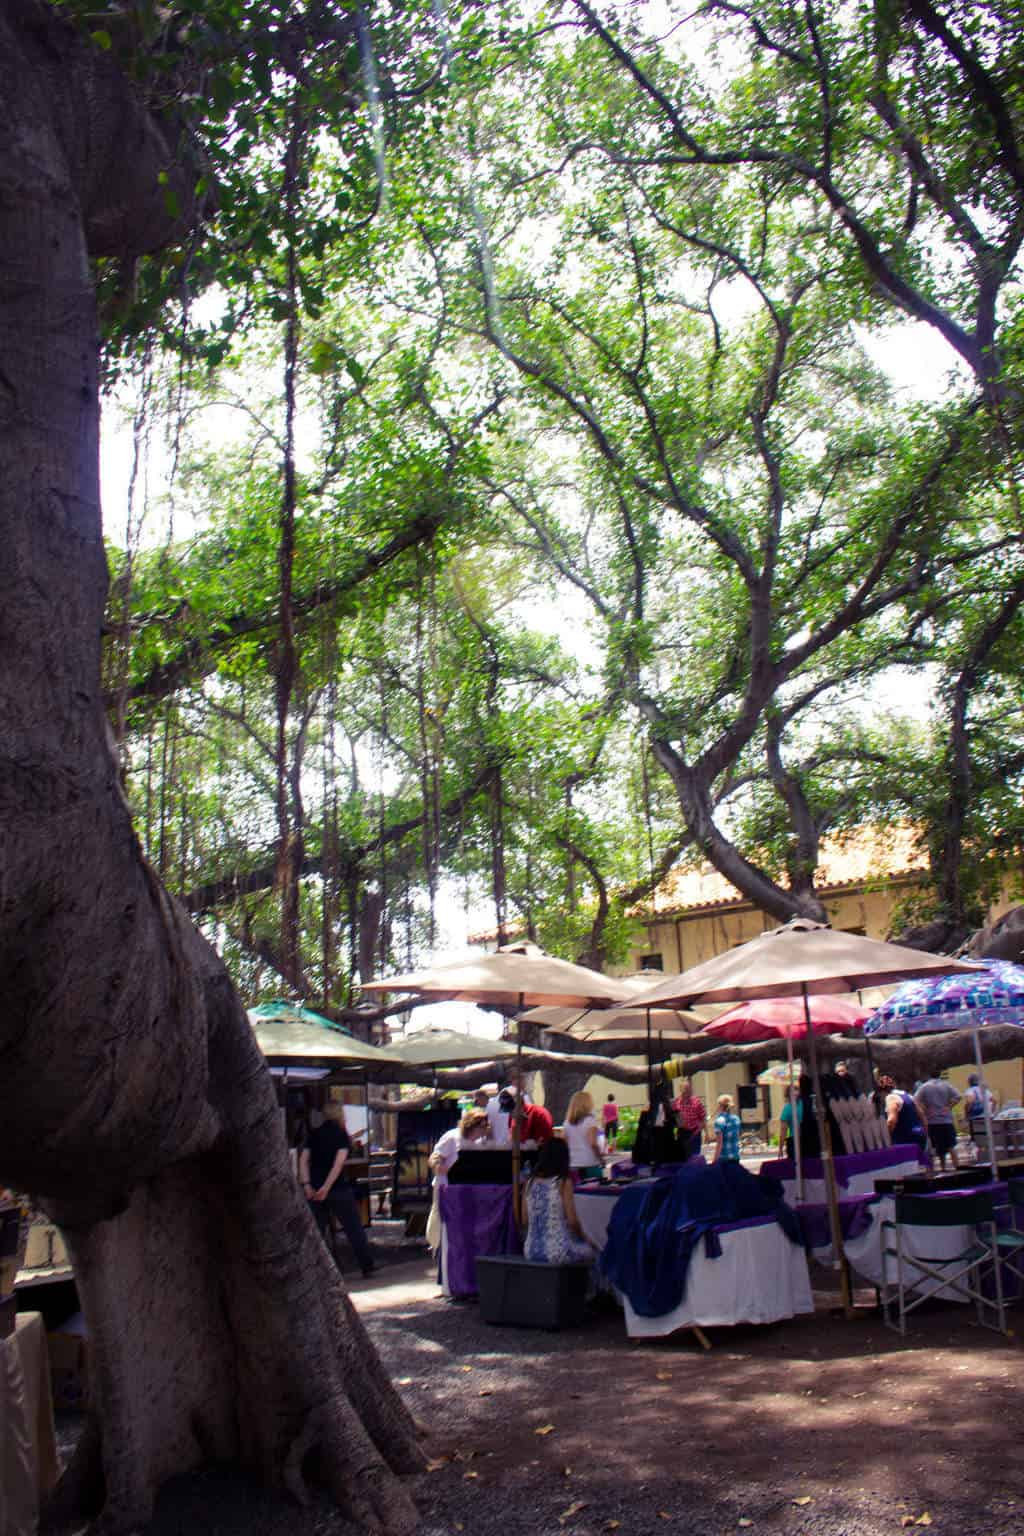 Arts and Crafts Fair and tangled trees